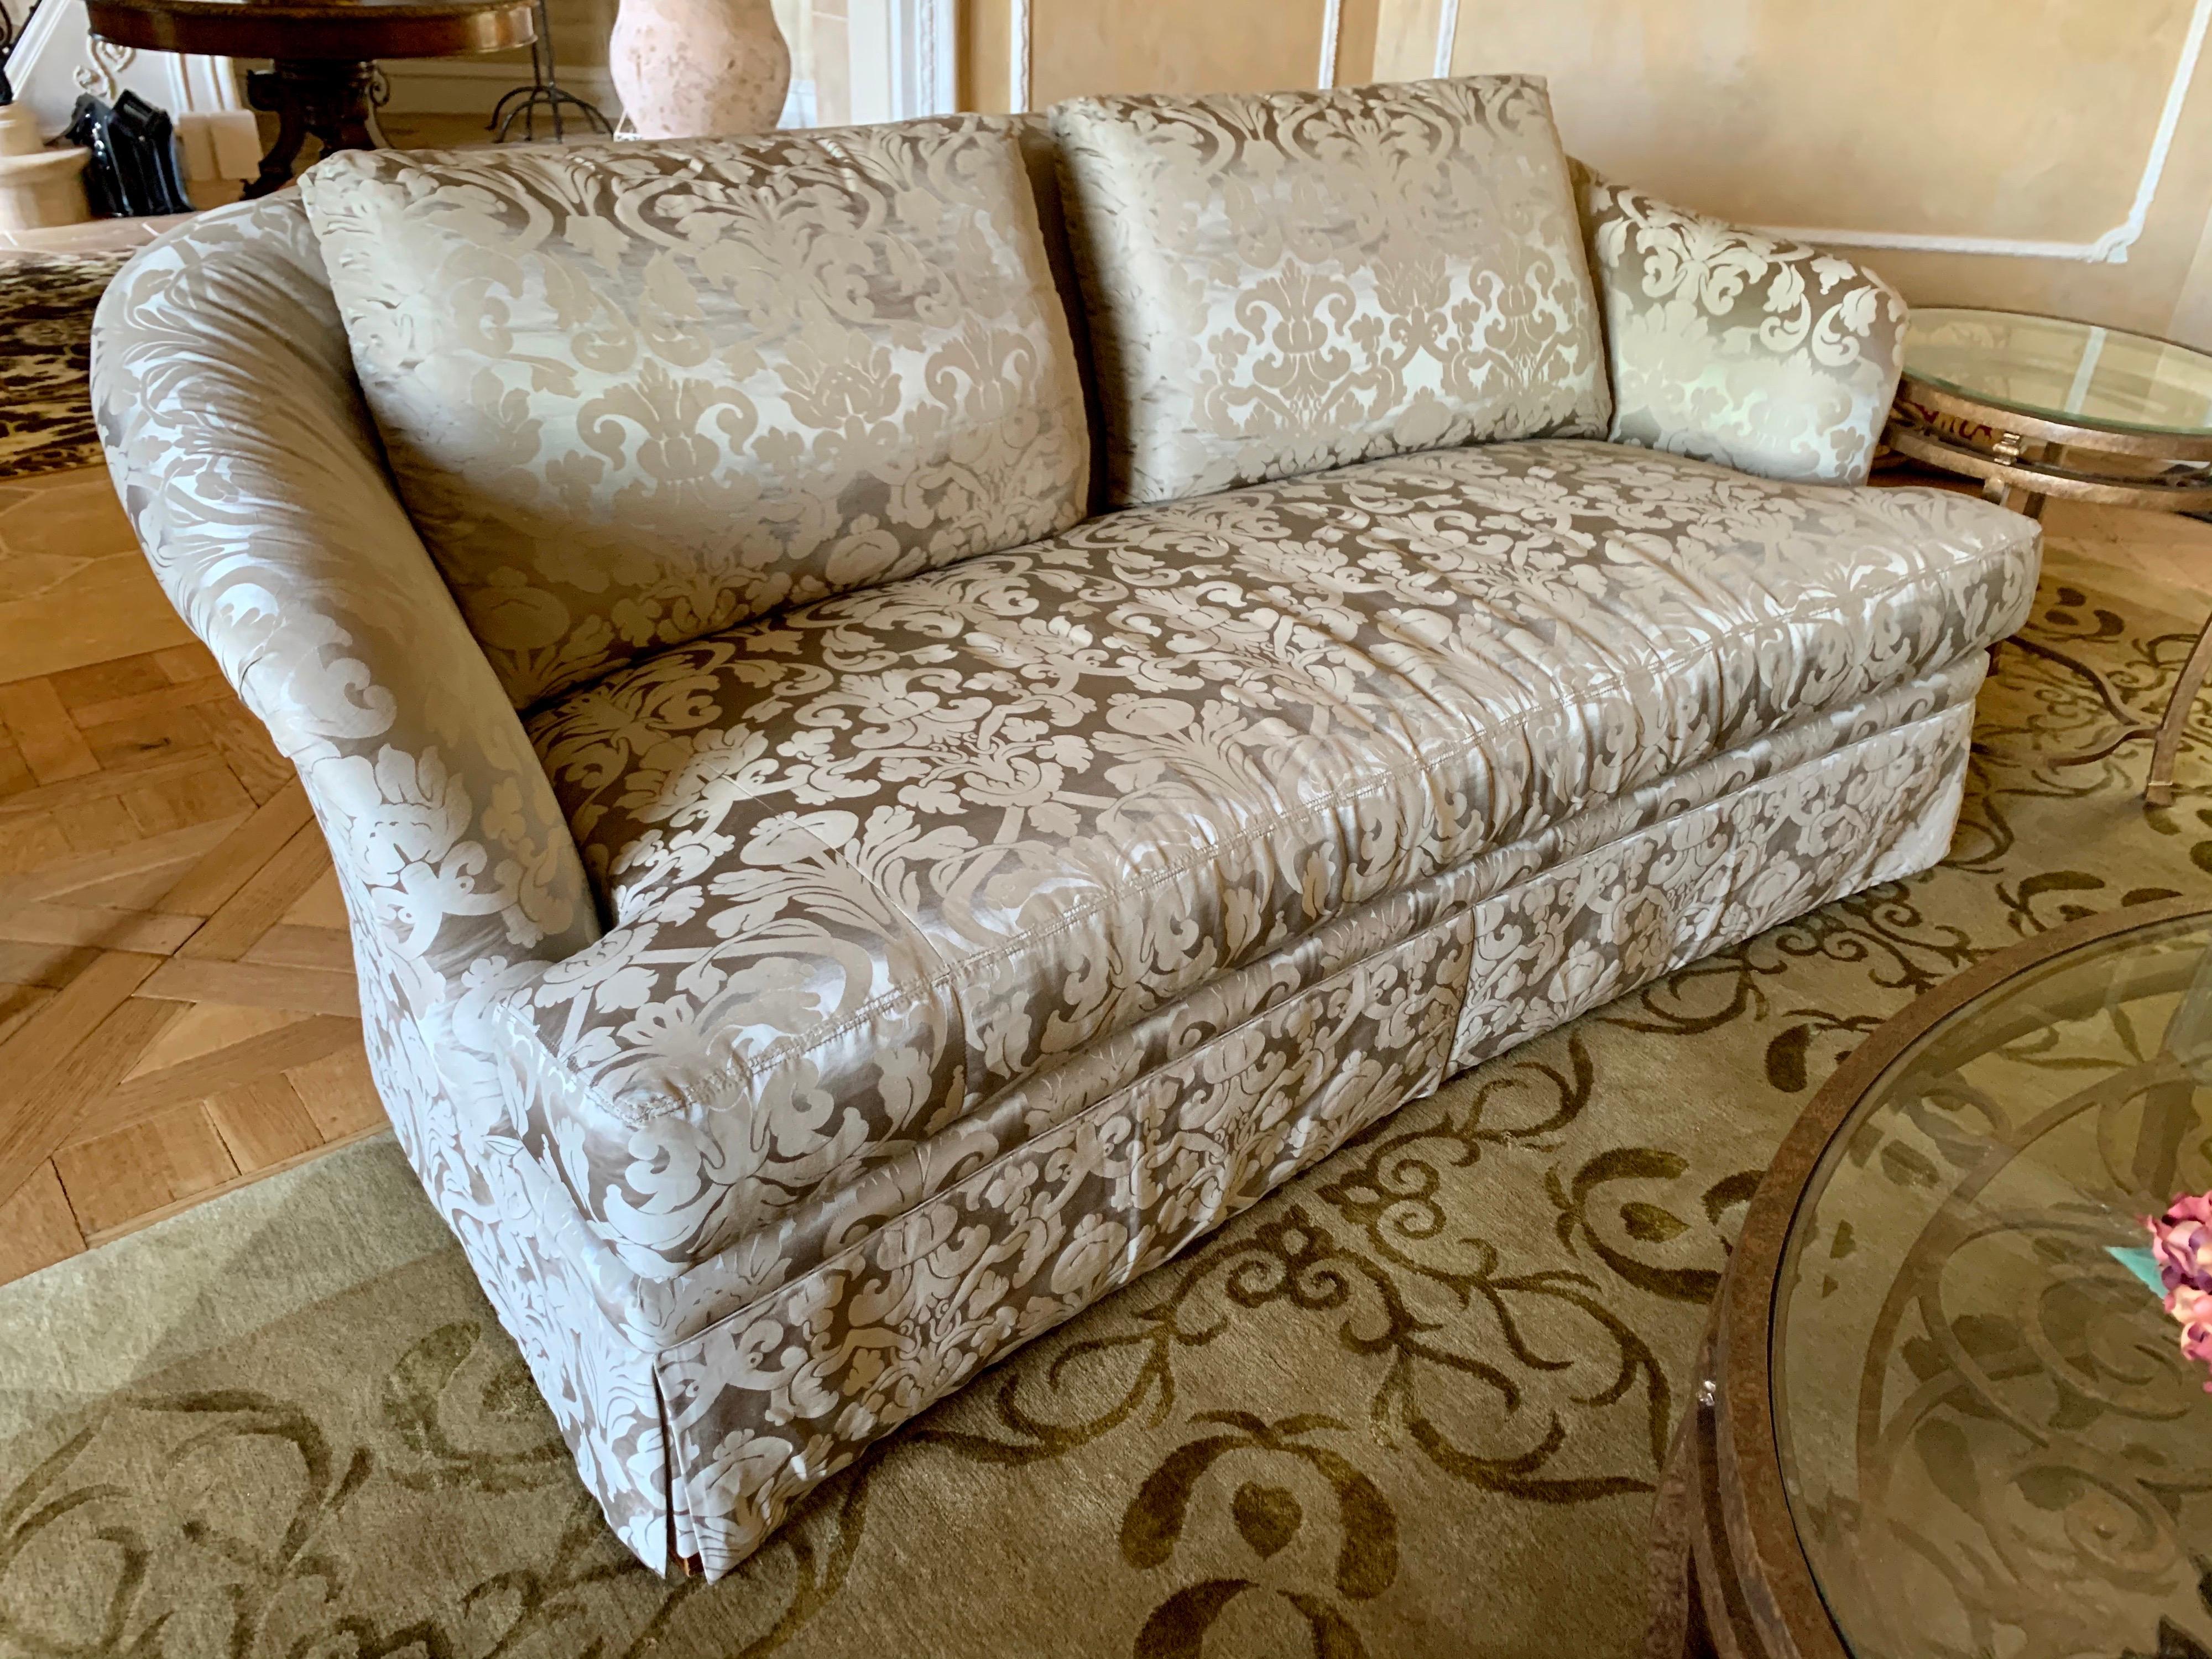 Elegant, mint condition Ferguson Copeland silk damask three seat sofa. The colors are stunning, taupe and a metallic, subtle gold.
Outstanding craftsmanship including eight-way hand tied construction.